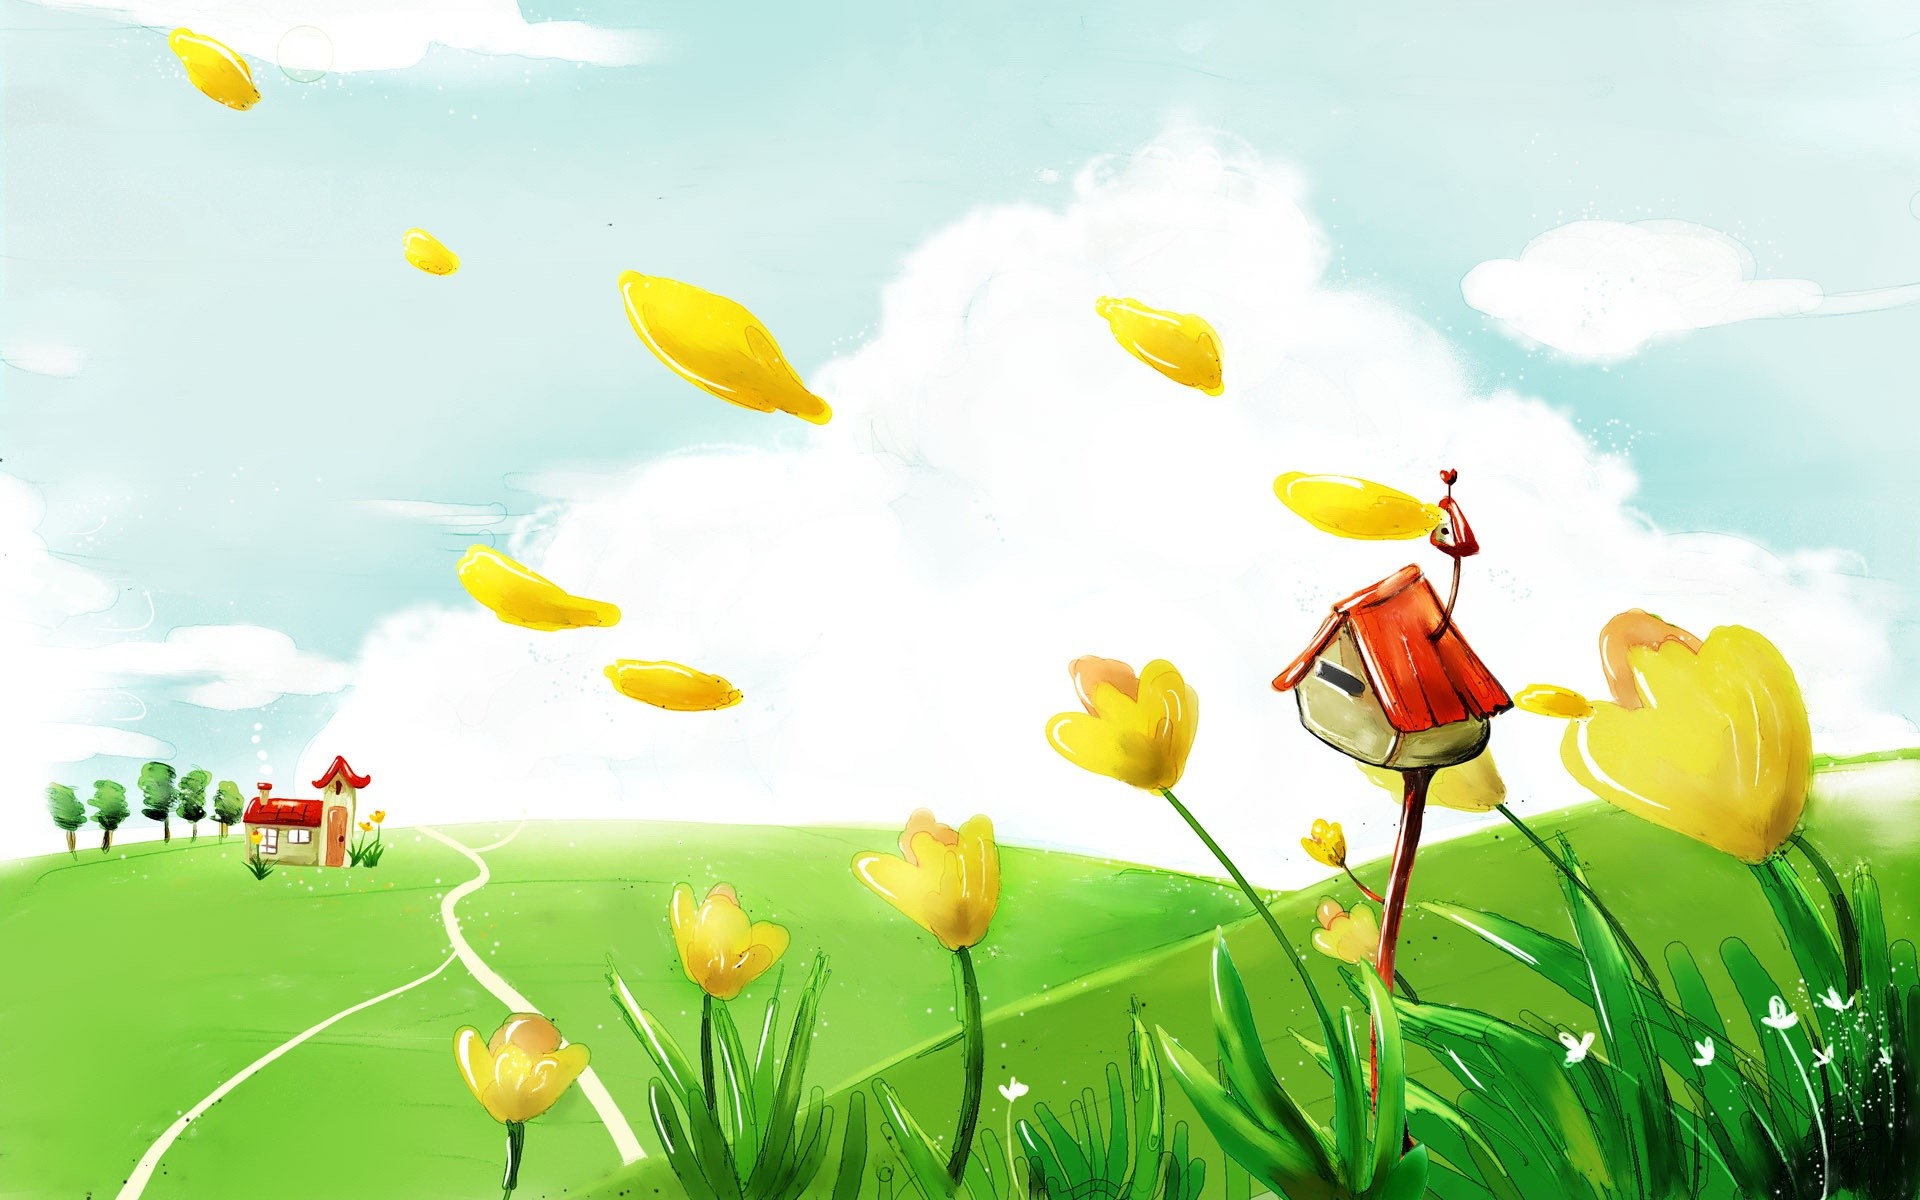 1920x1200 sweet home for kids play photo in 1080p desktop background wallpapers .